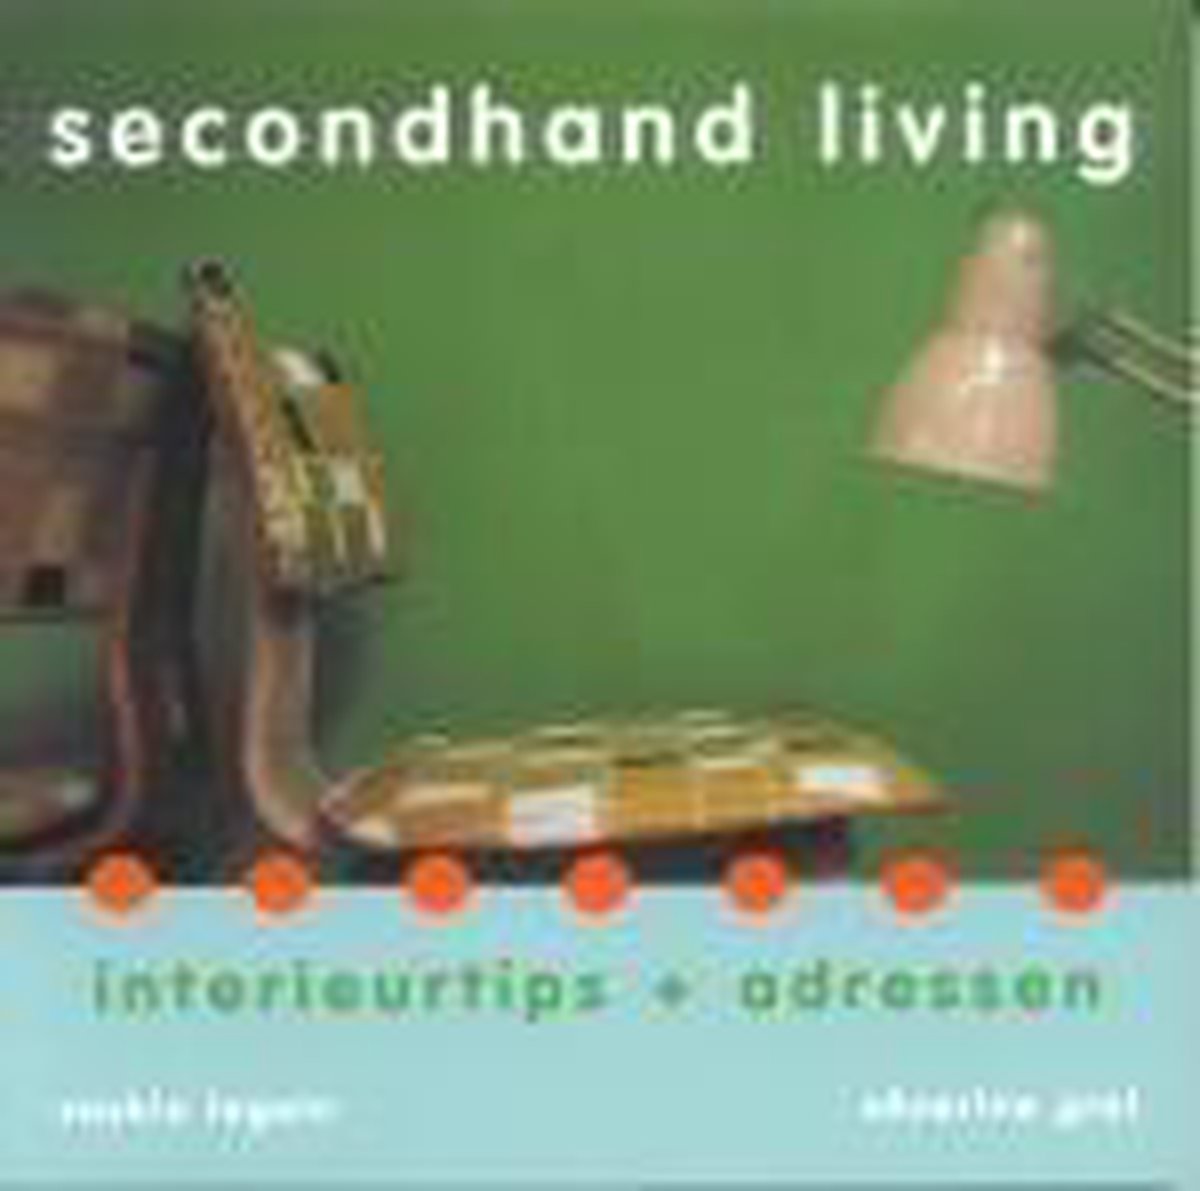 Secondhand Living